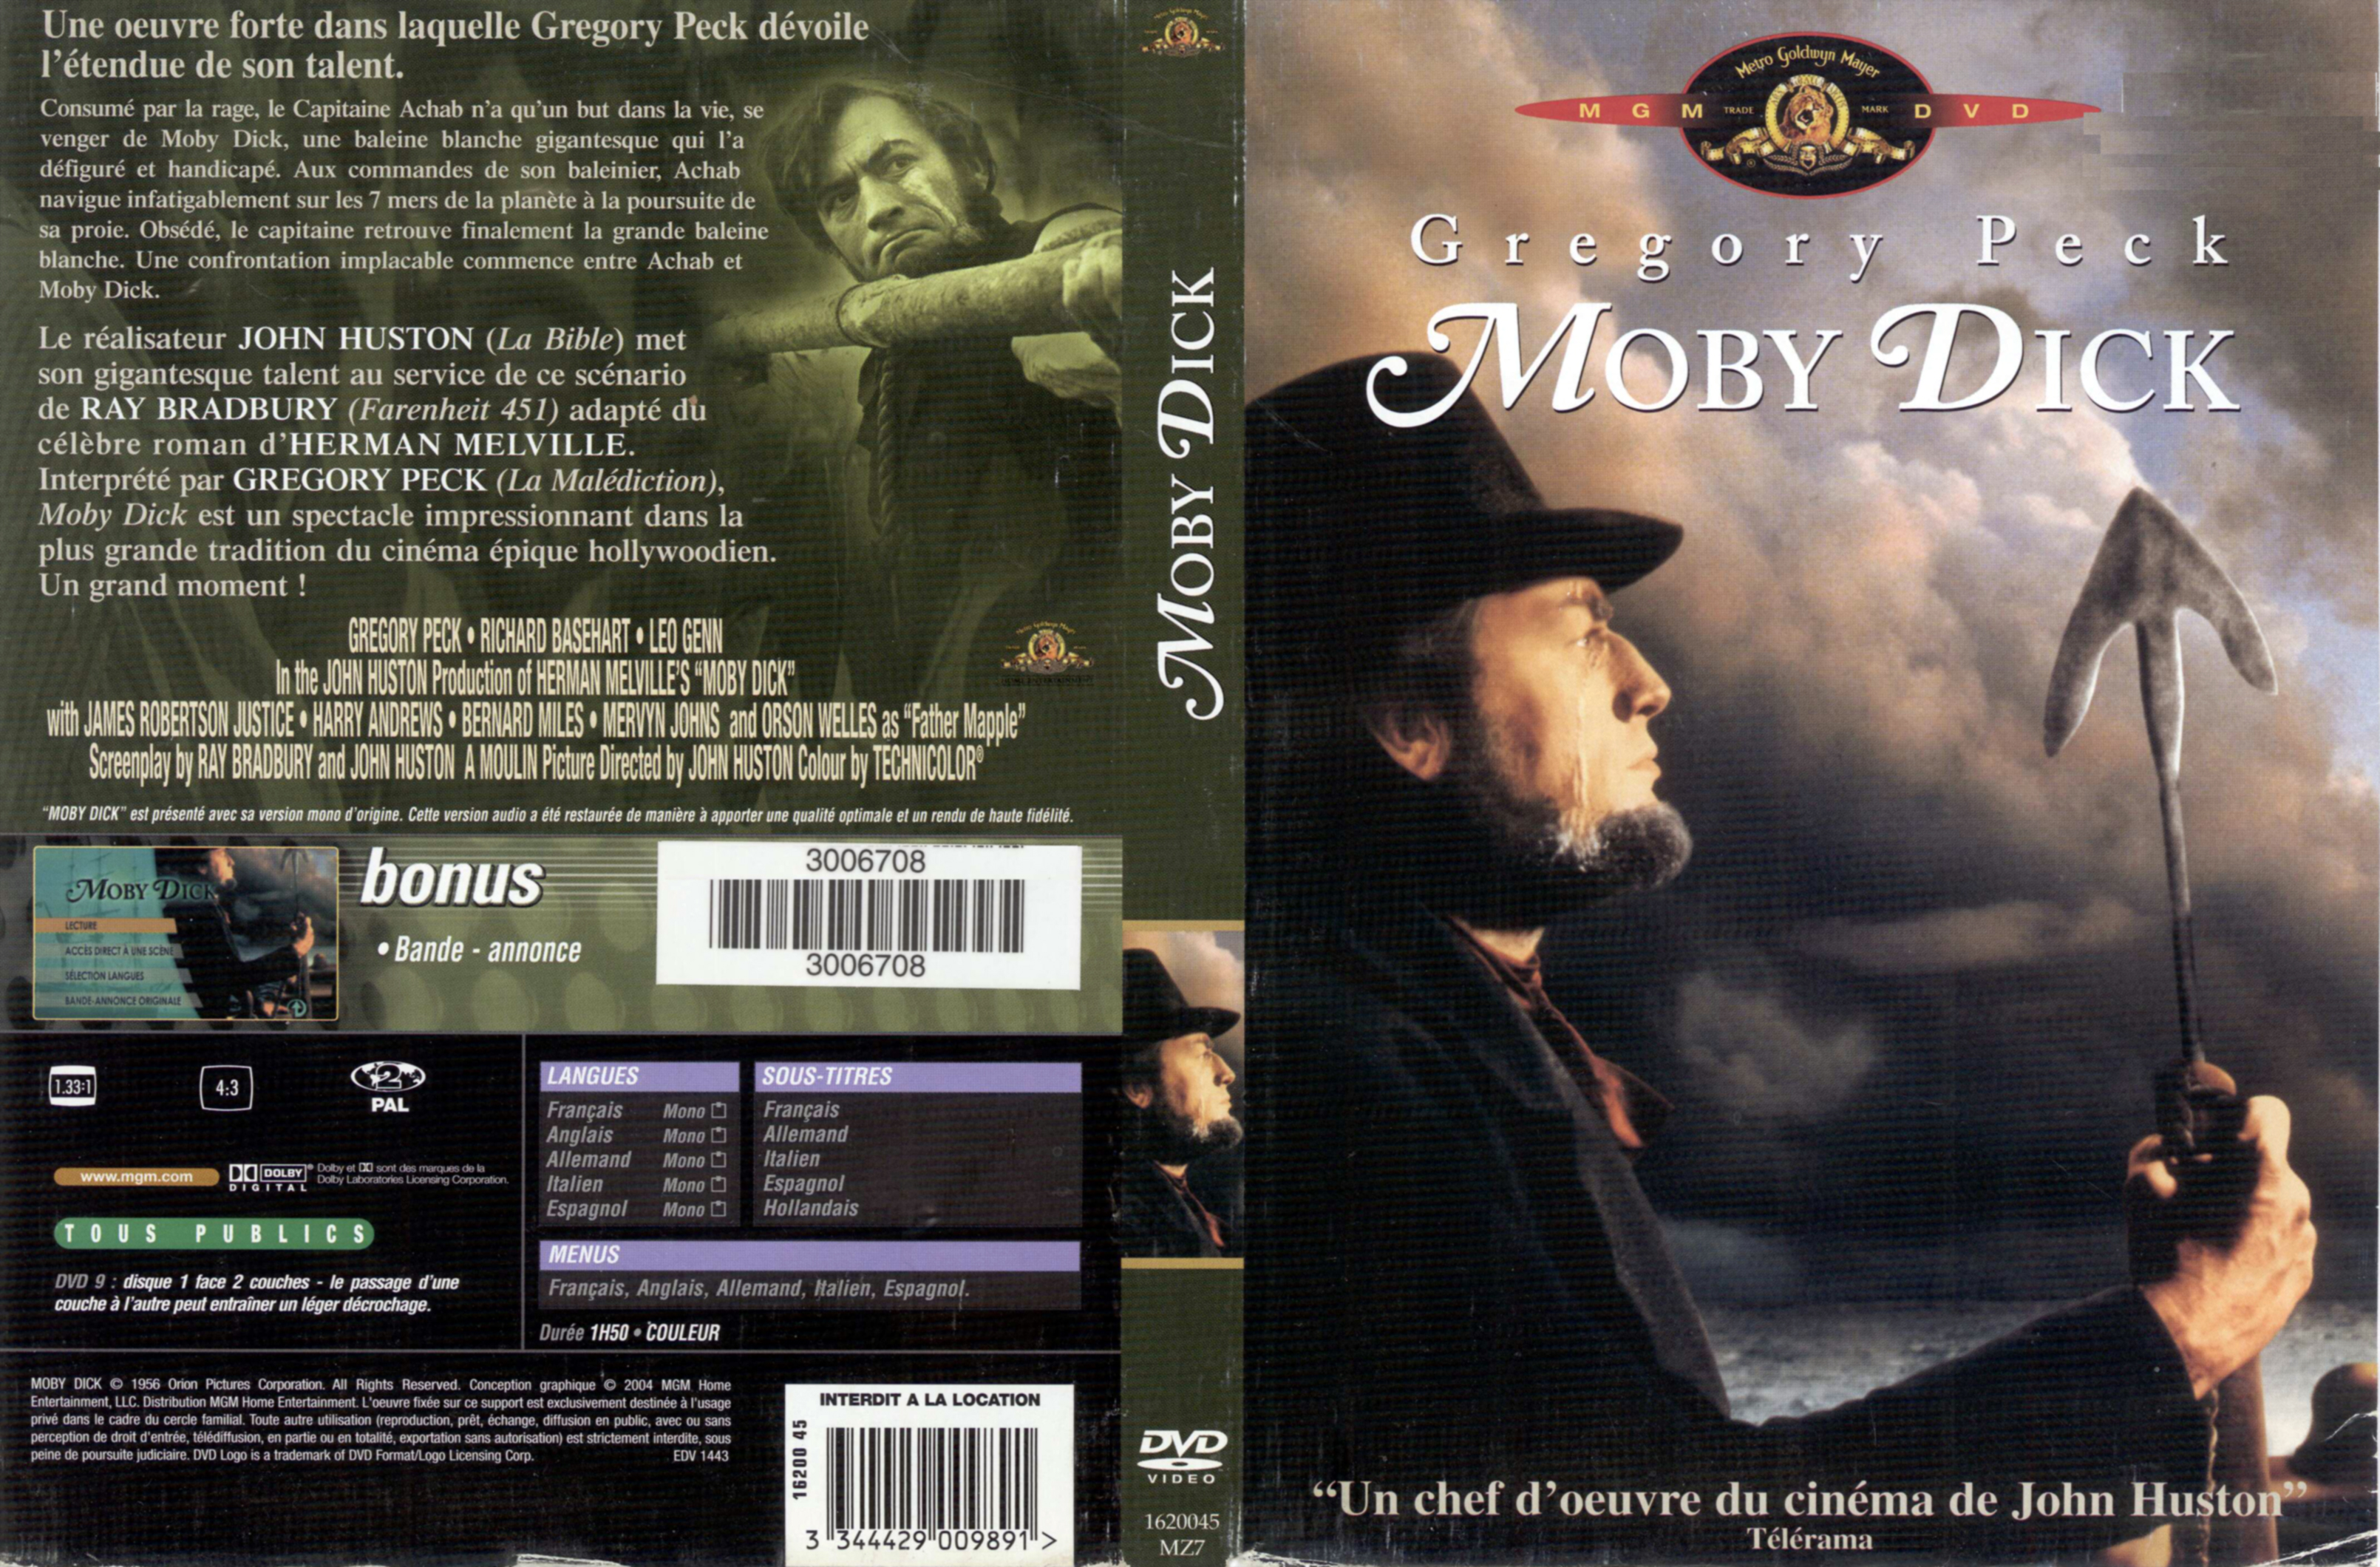 Jaquette DVD Moby Dick (1956) v2